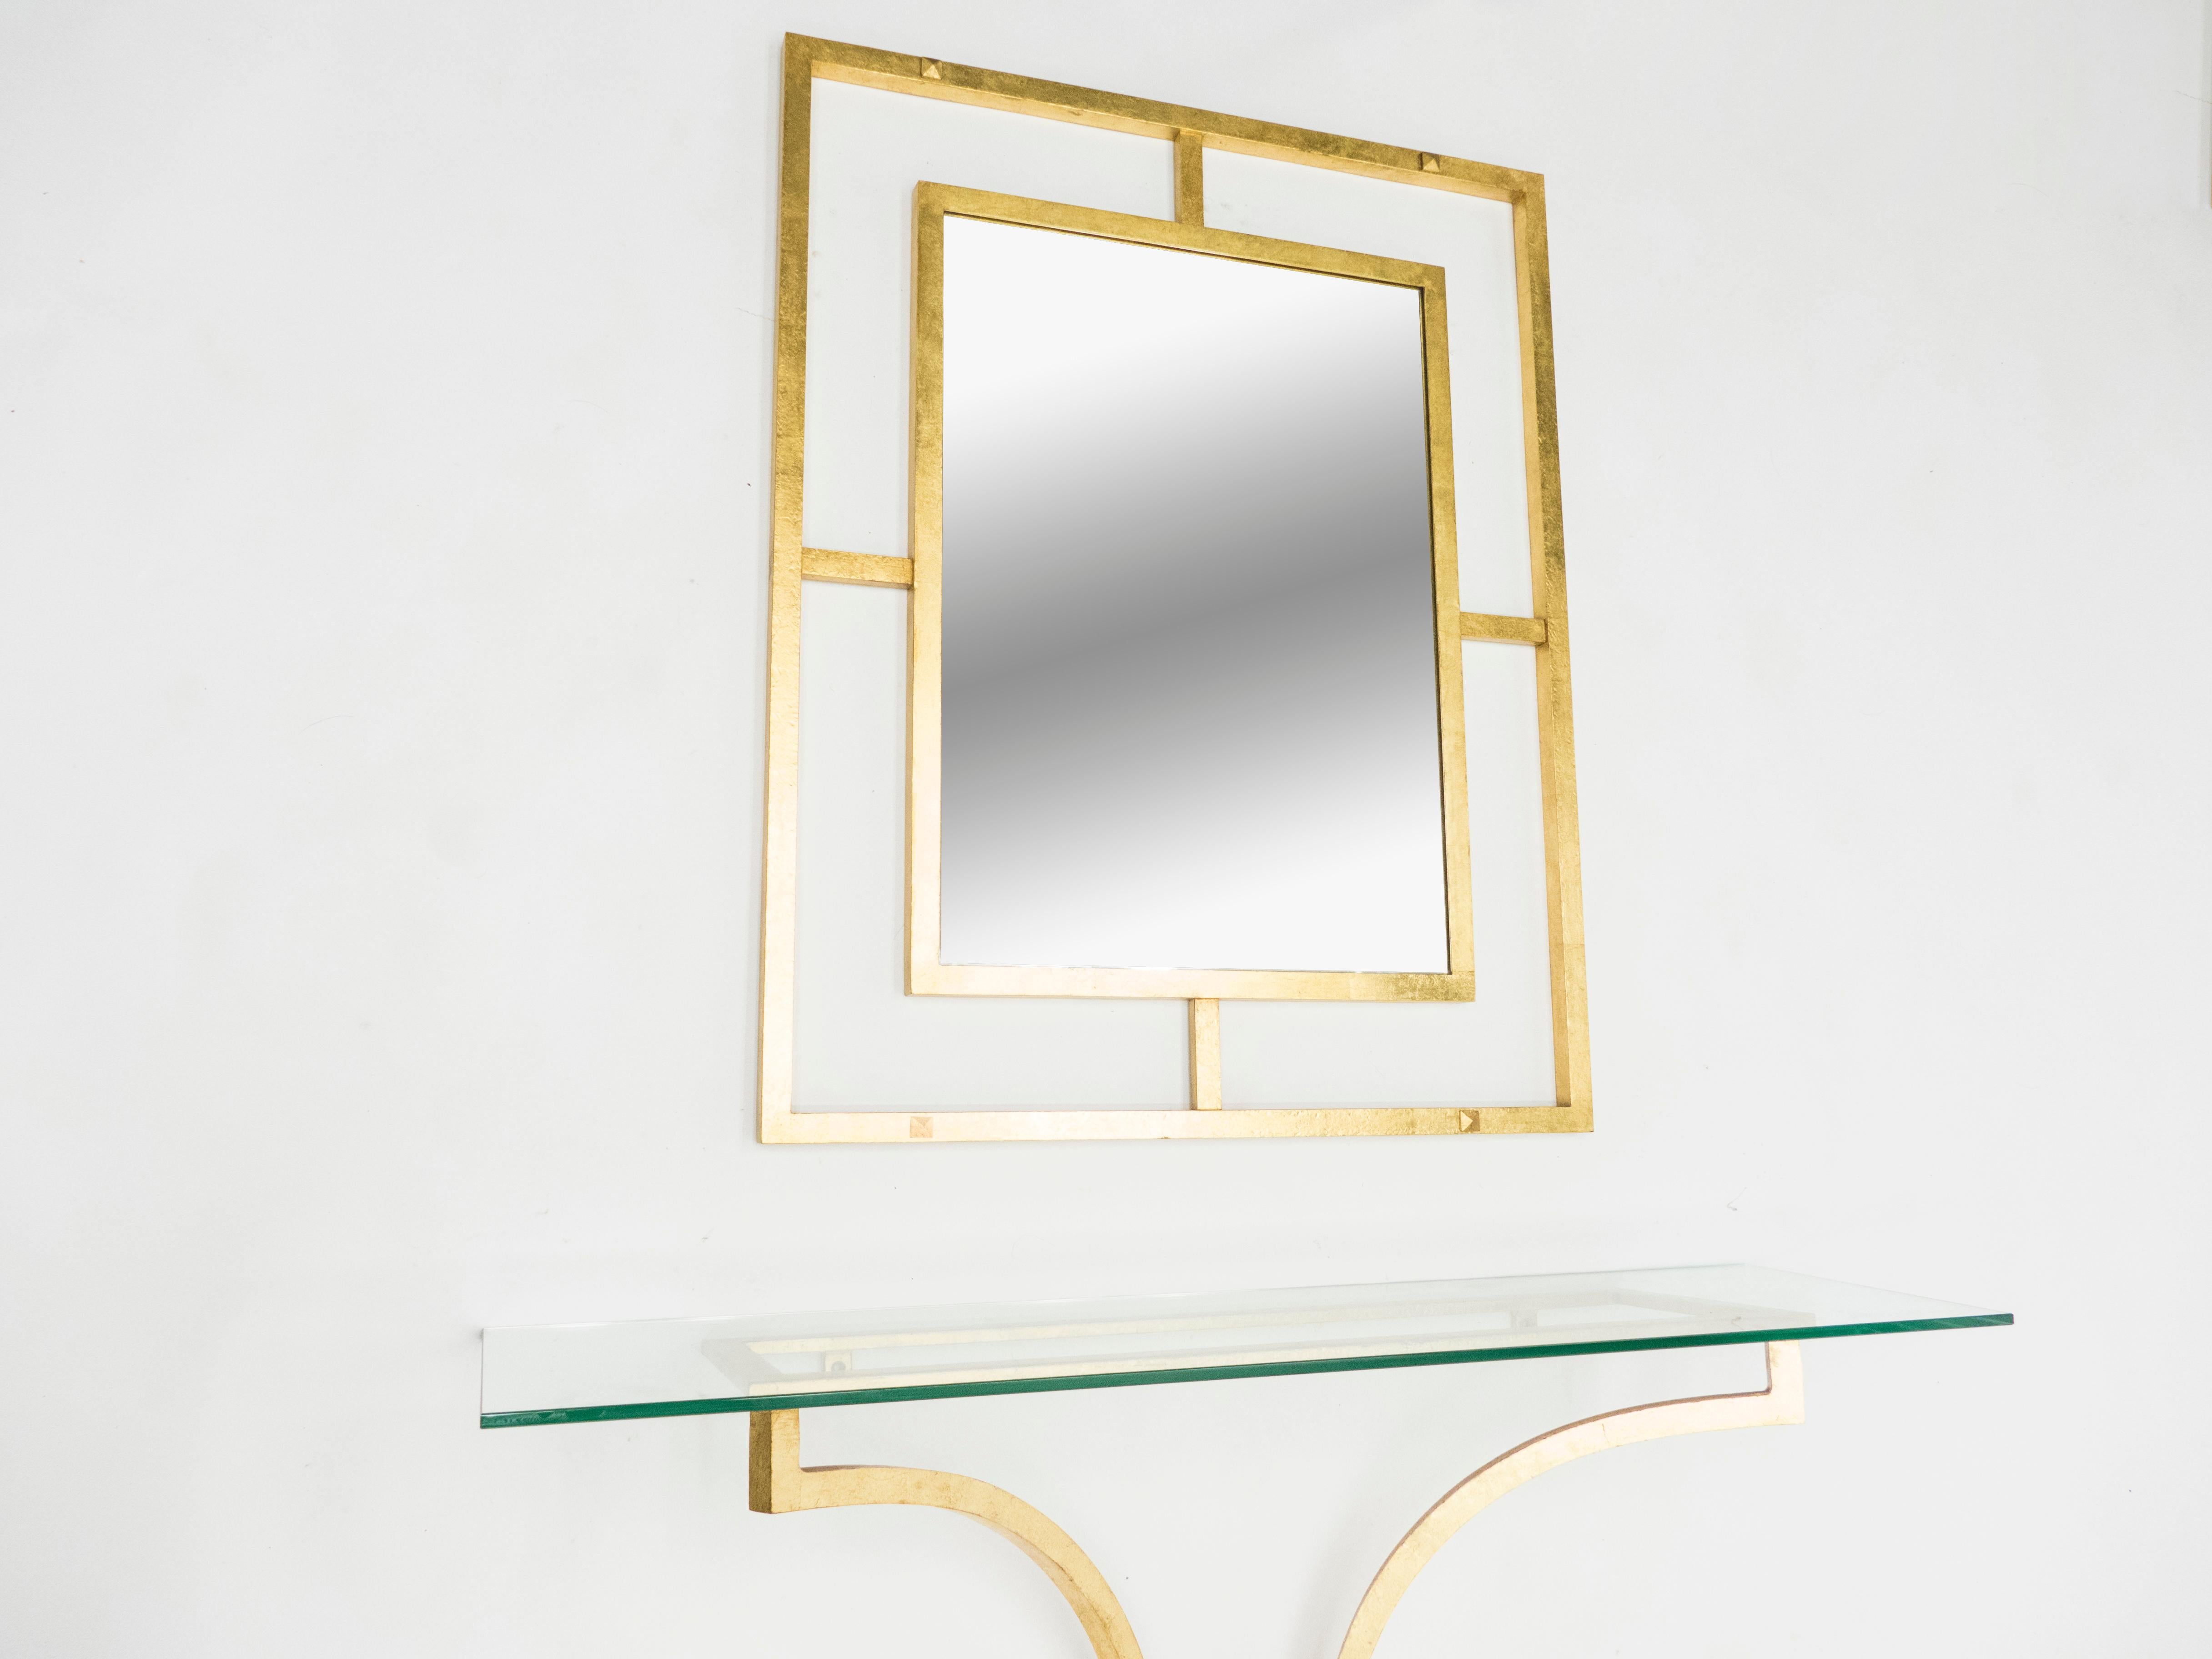 Rare Roger Thibier Gilt Wrought Iron Gold Leaf Console Table with Mirror, 1960s For Sale 1